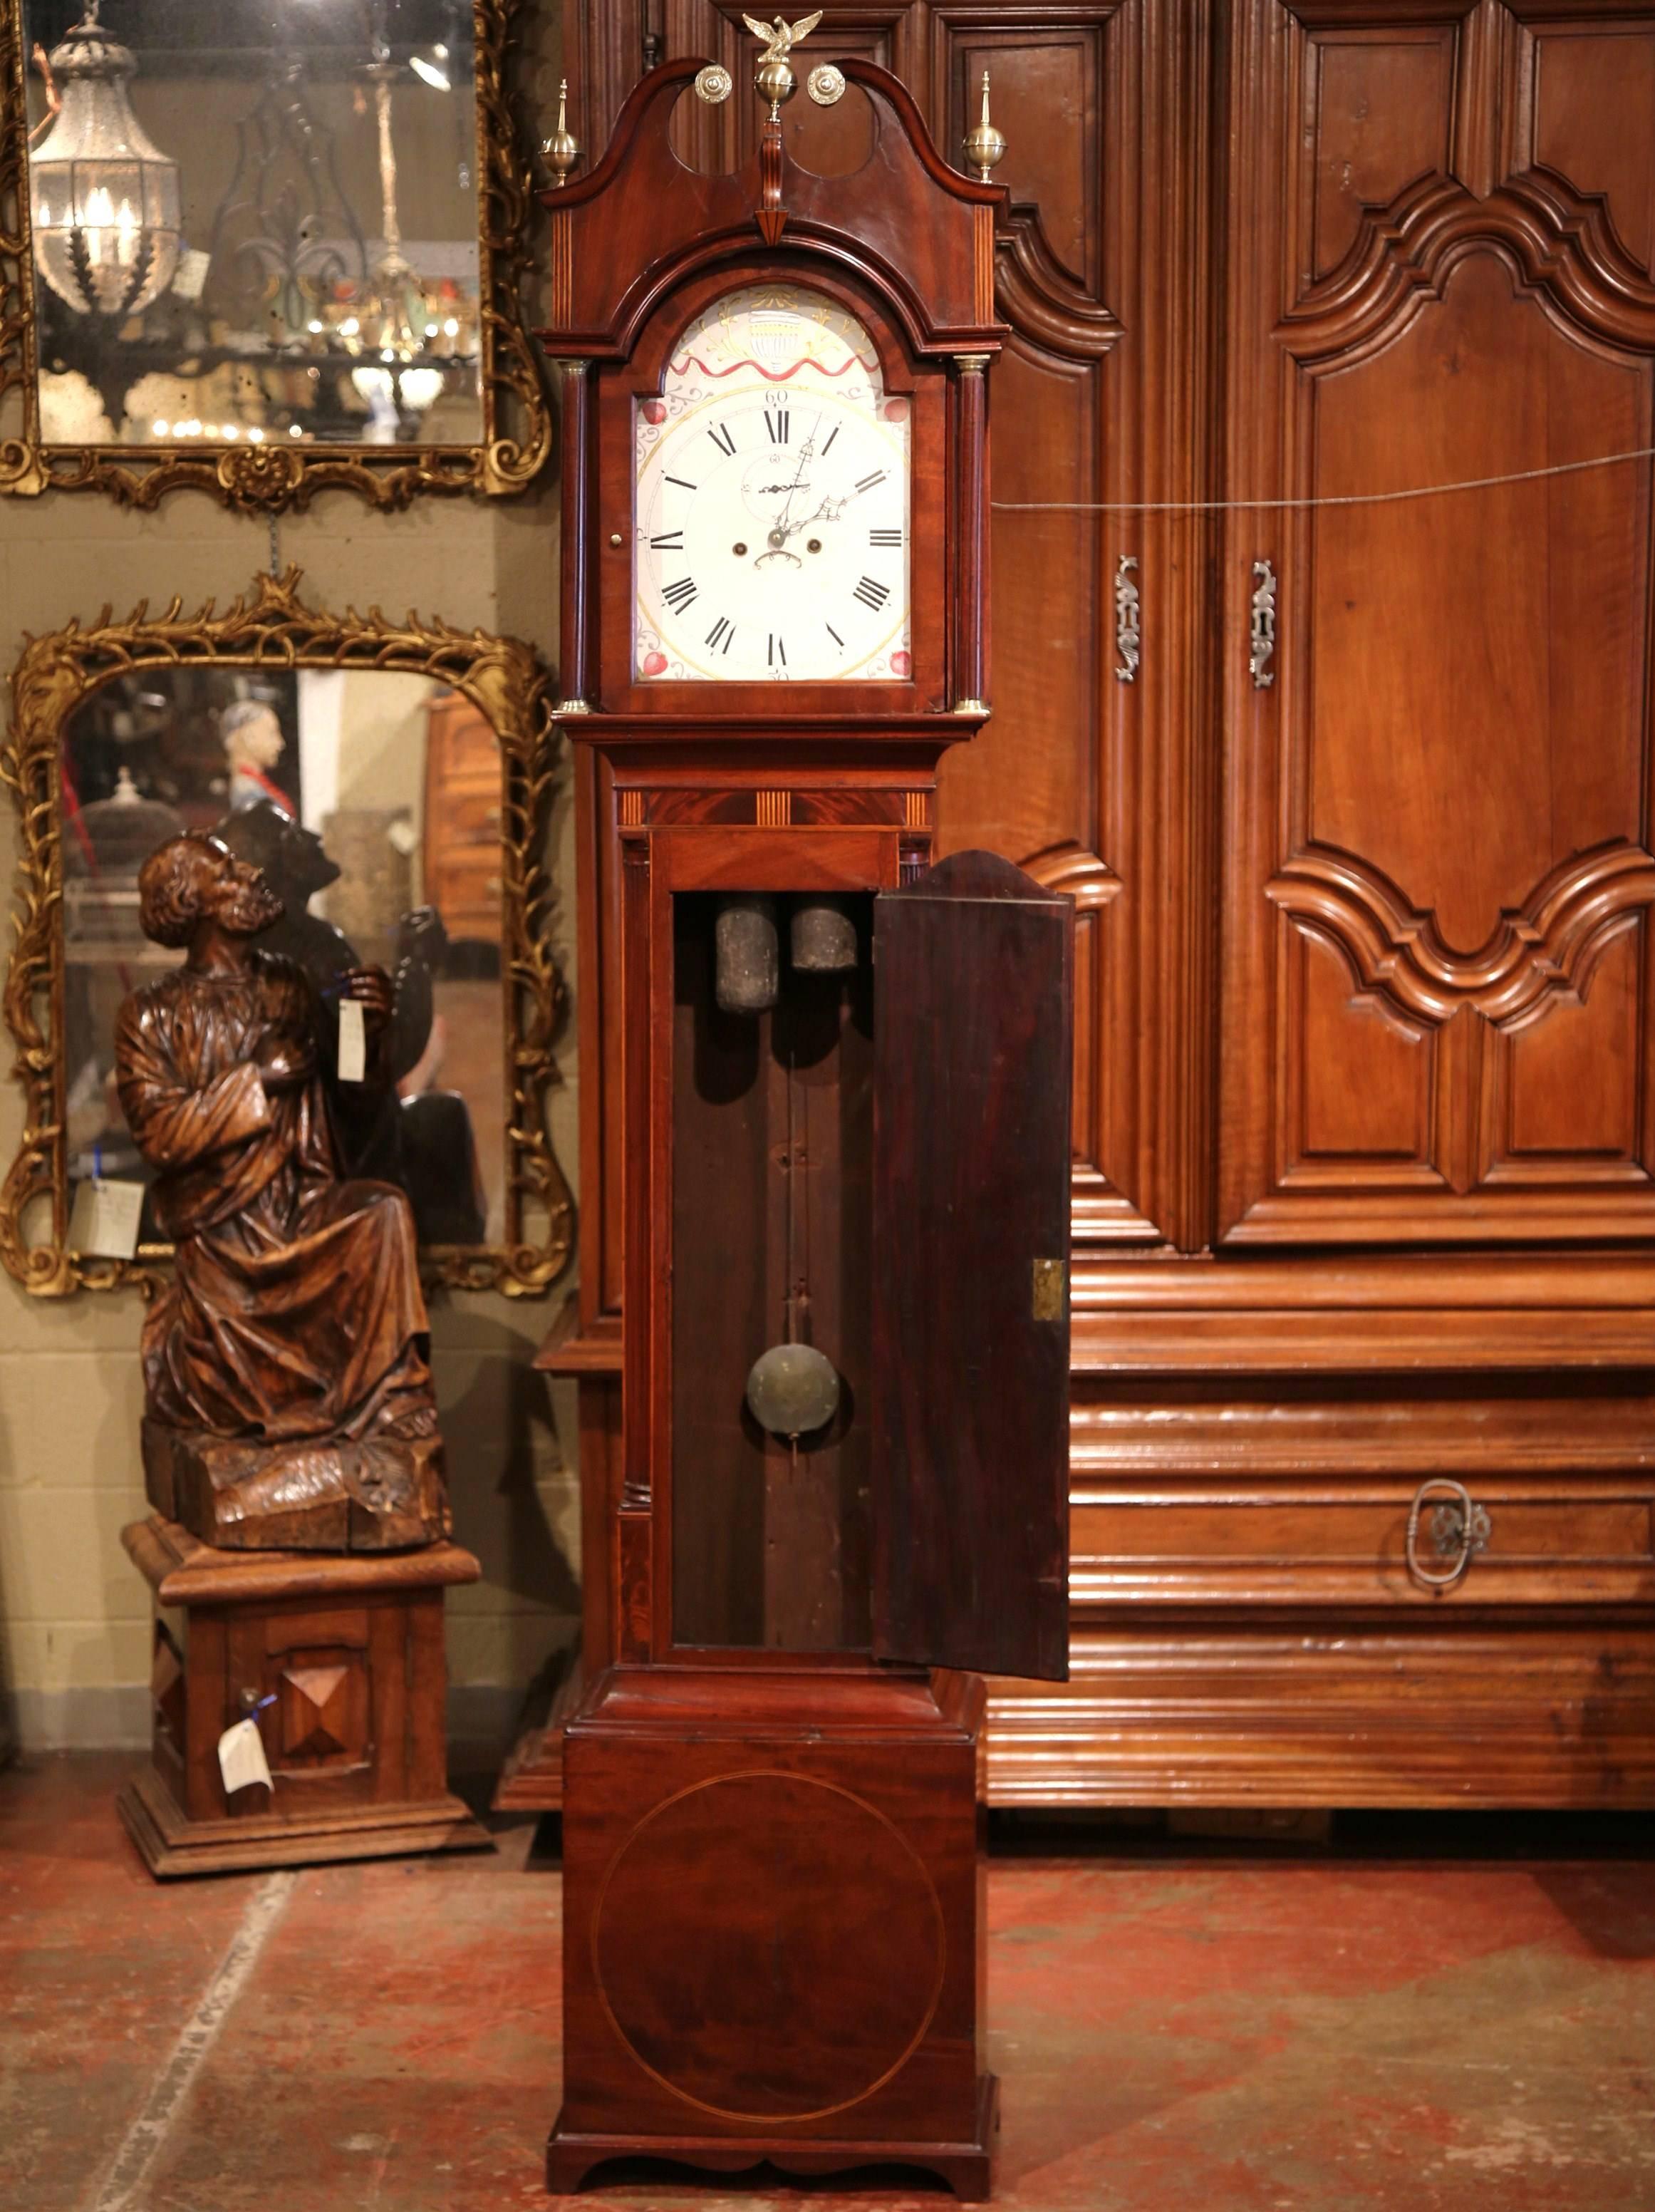 Chippendale 18th Century English Carved Mahogany Tall Case Clock with Brass Mounts